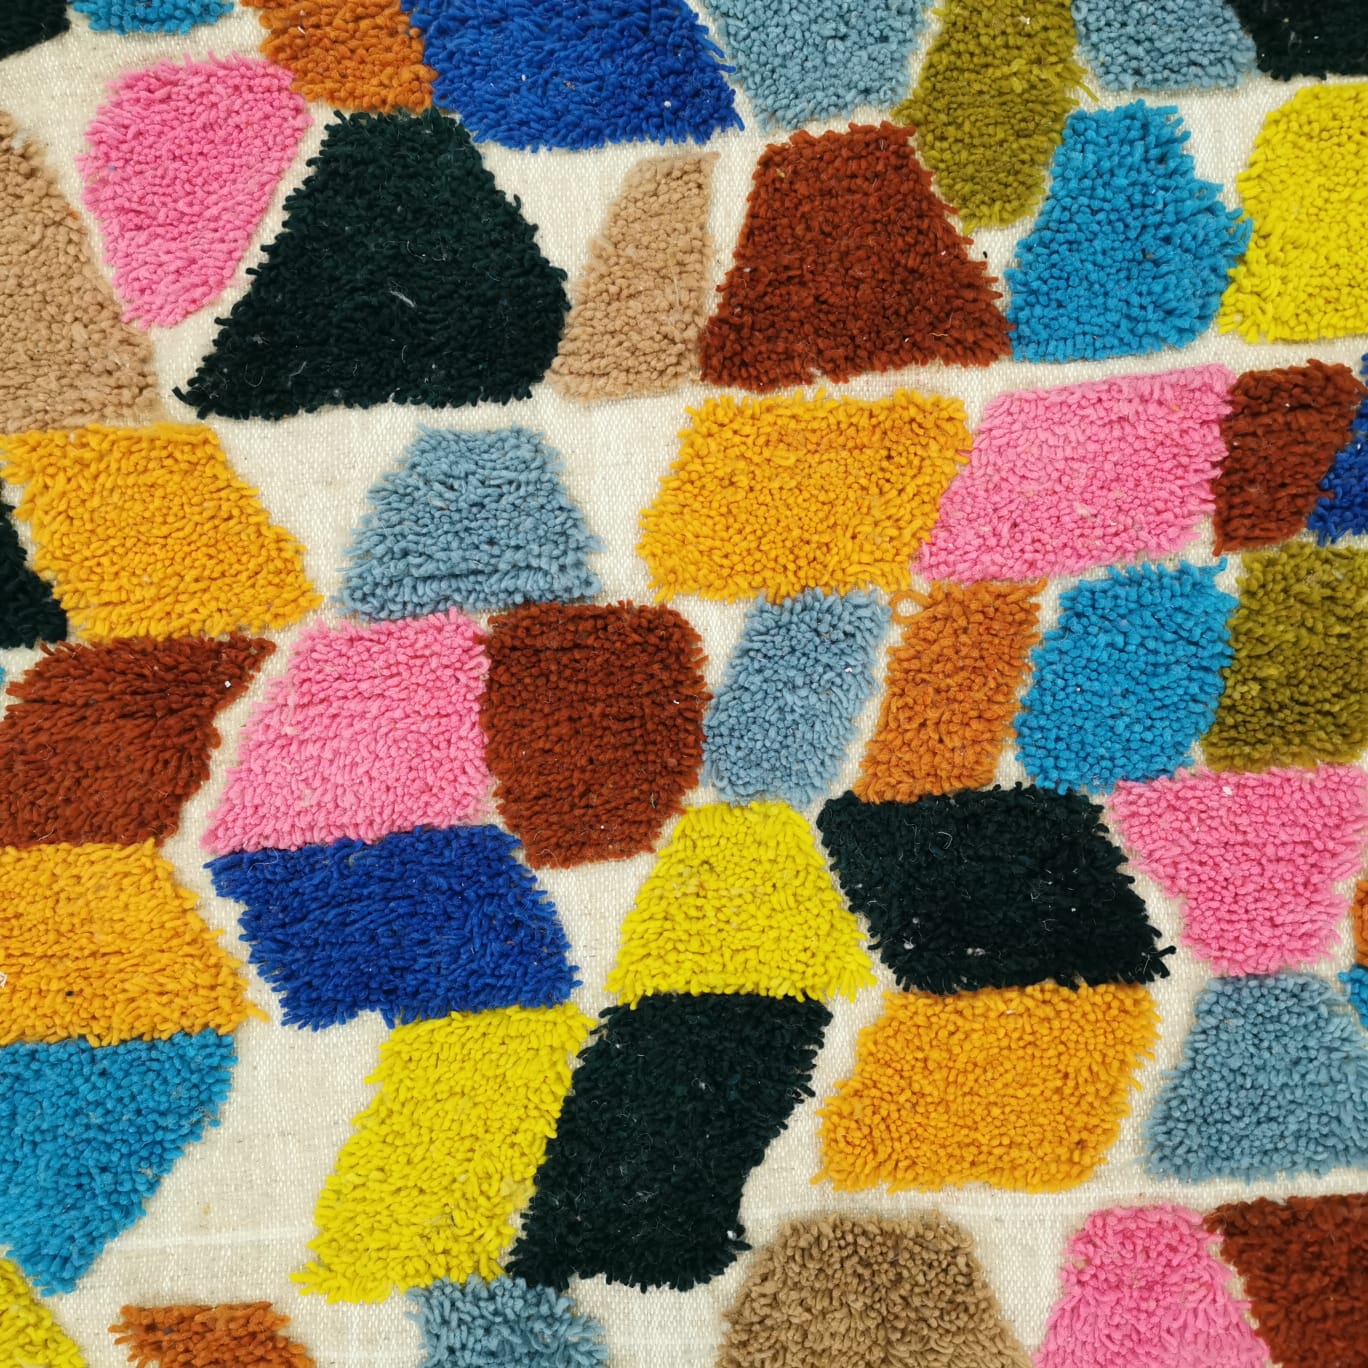 Custom Design Options Personalize your rug to match your unique style